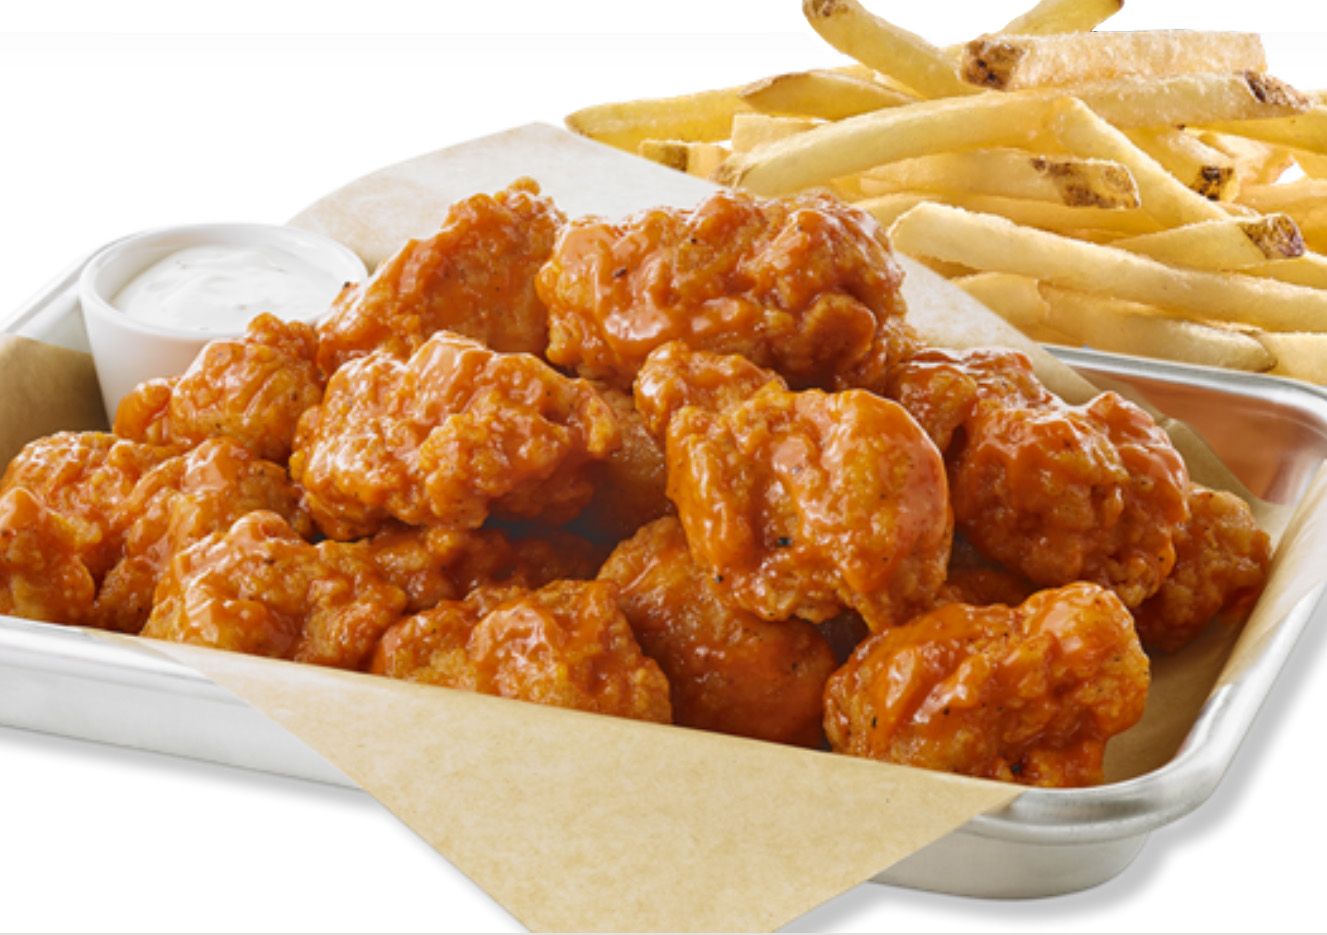 Buffalo Wild Wings is Now Offering a New $9.99 Bundle with 10 Boneless Chicken Wings and Fries